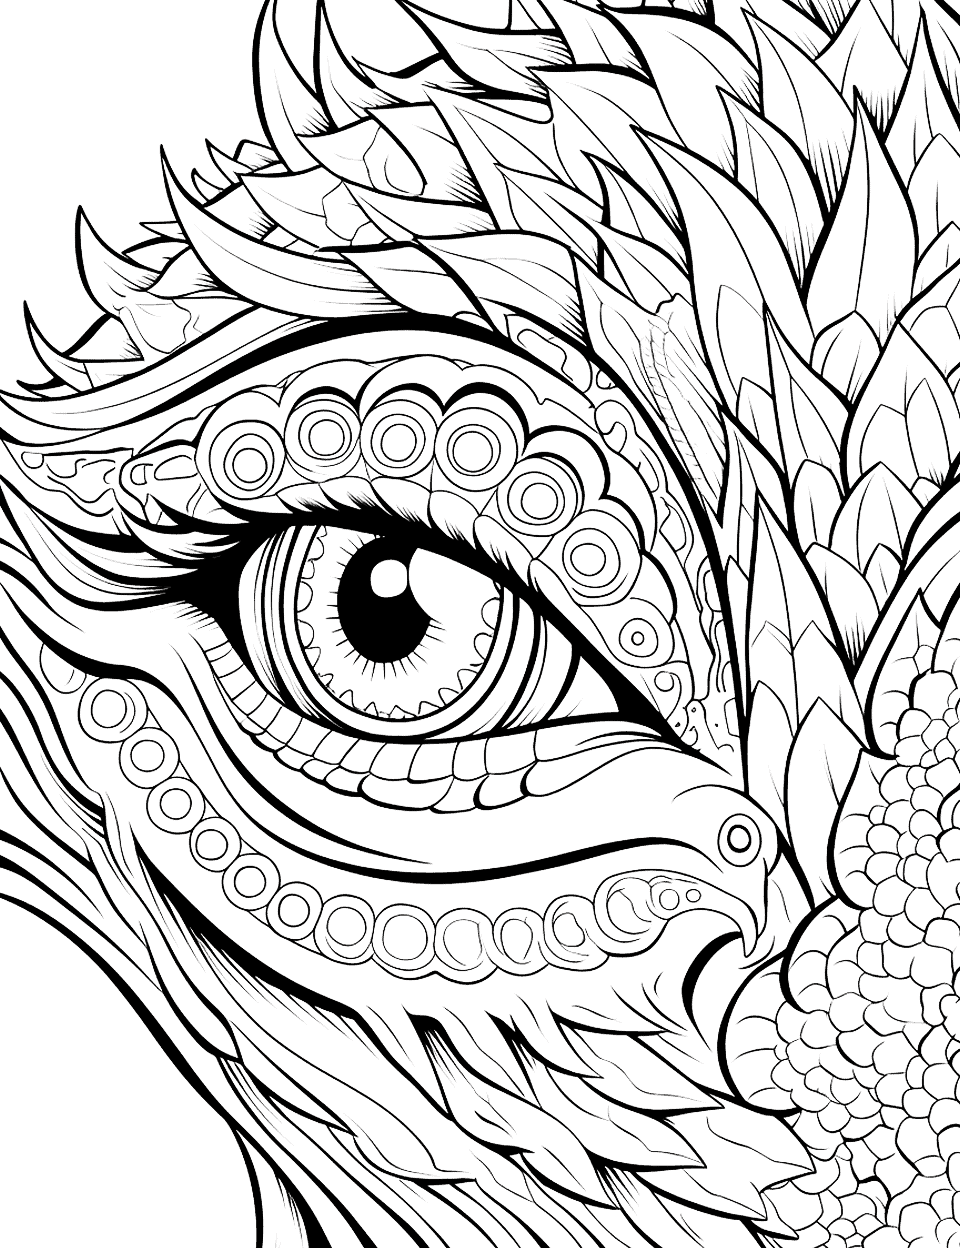 Eye of the Dragon Adult Coloring Page - A close-up of a mystical dragon’s eye.